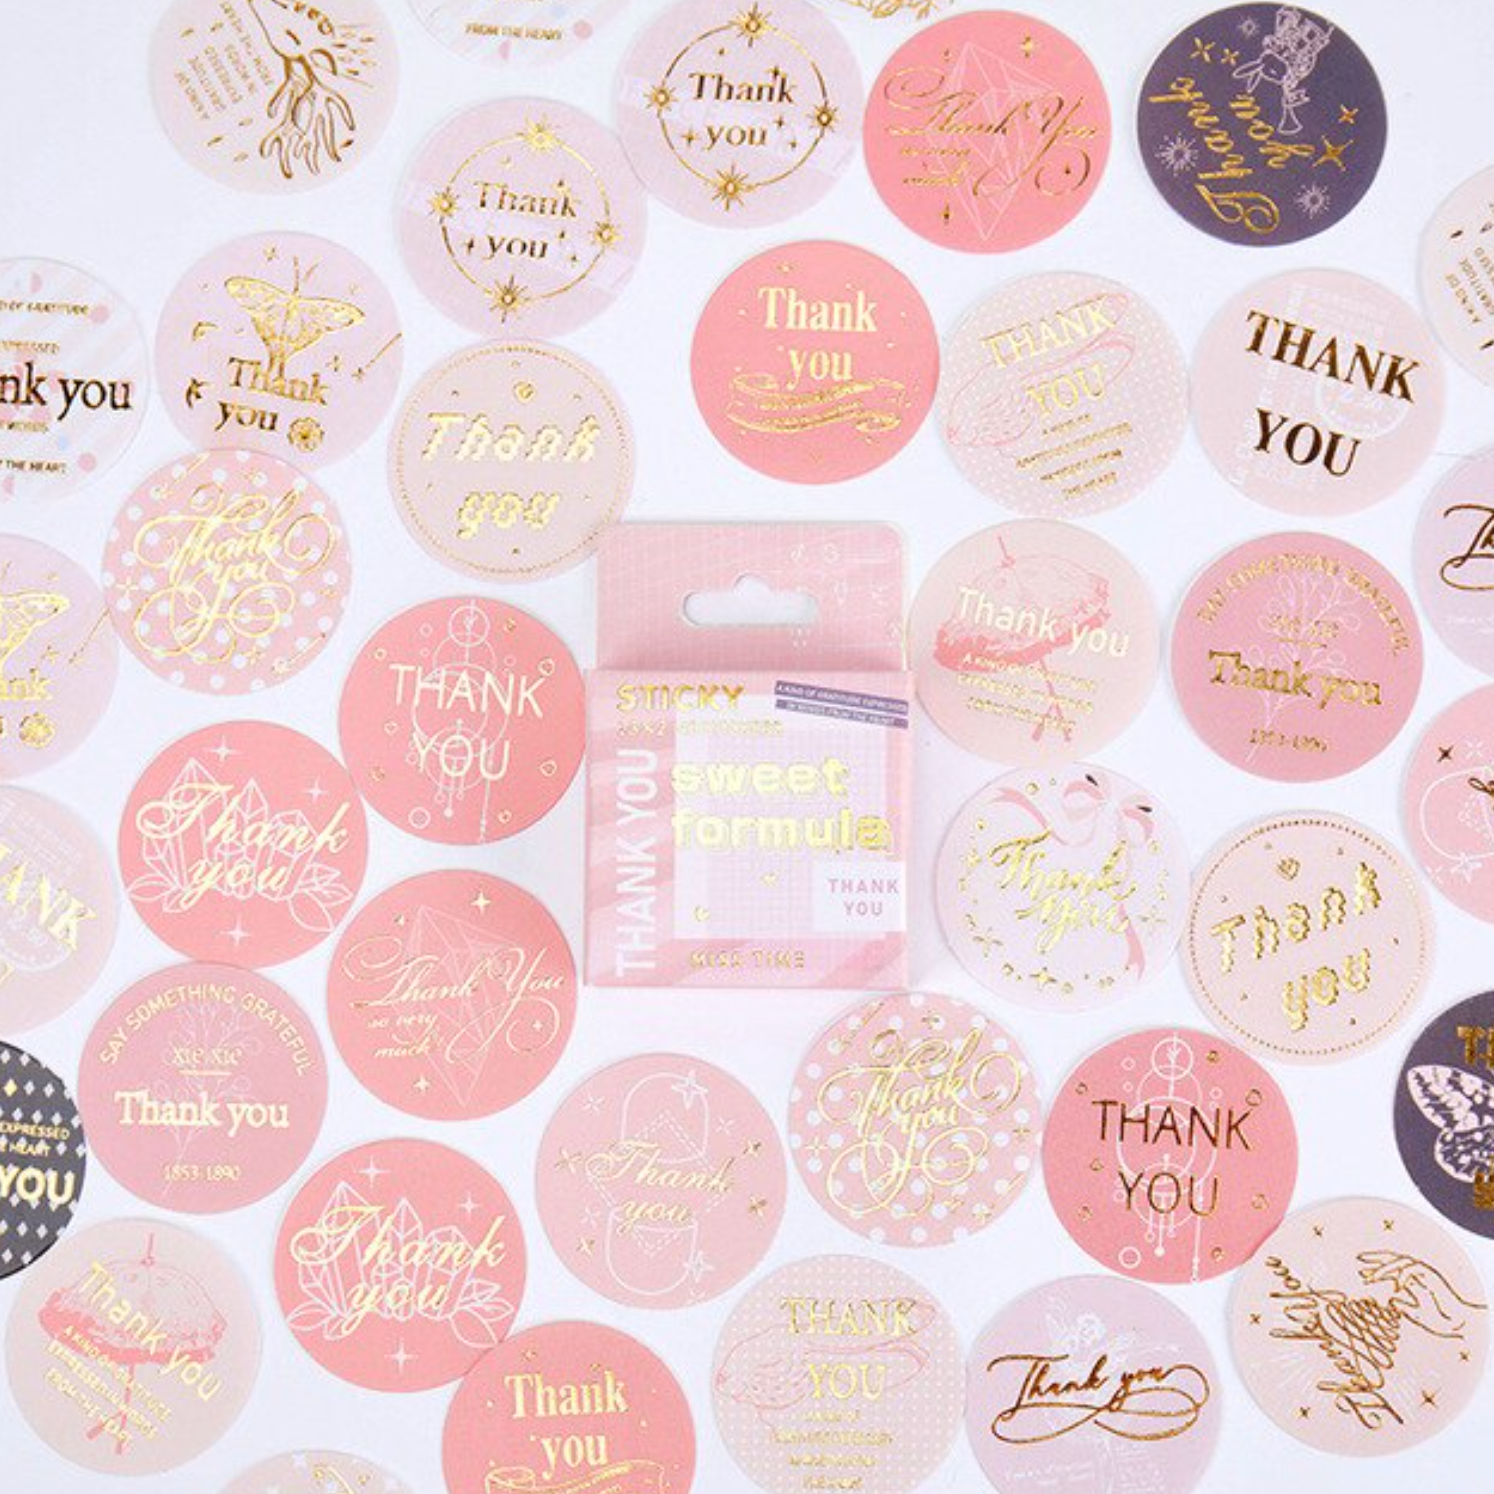 Sweet Thank You Stickers - pack of 45